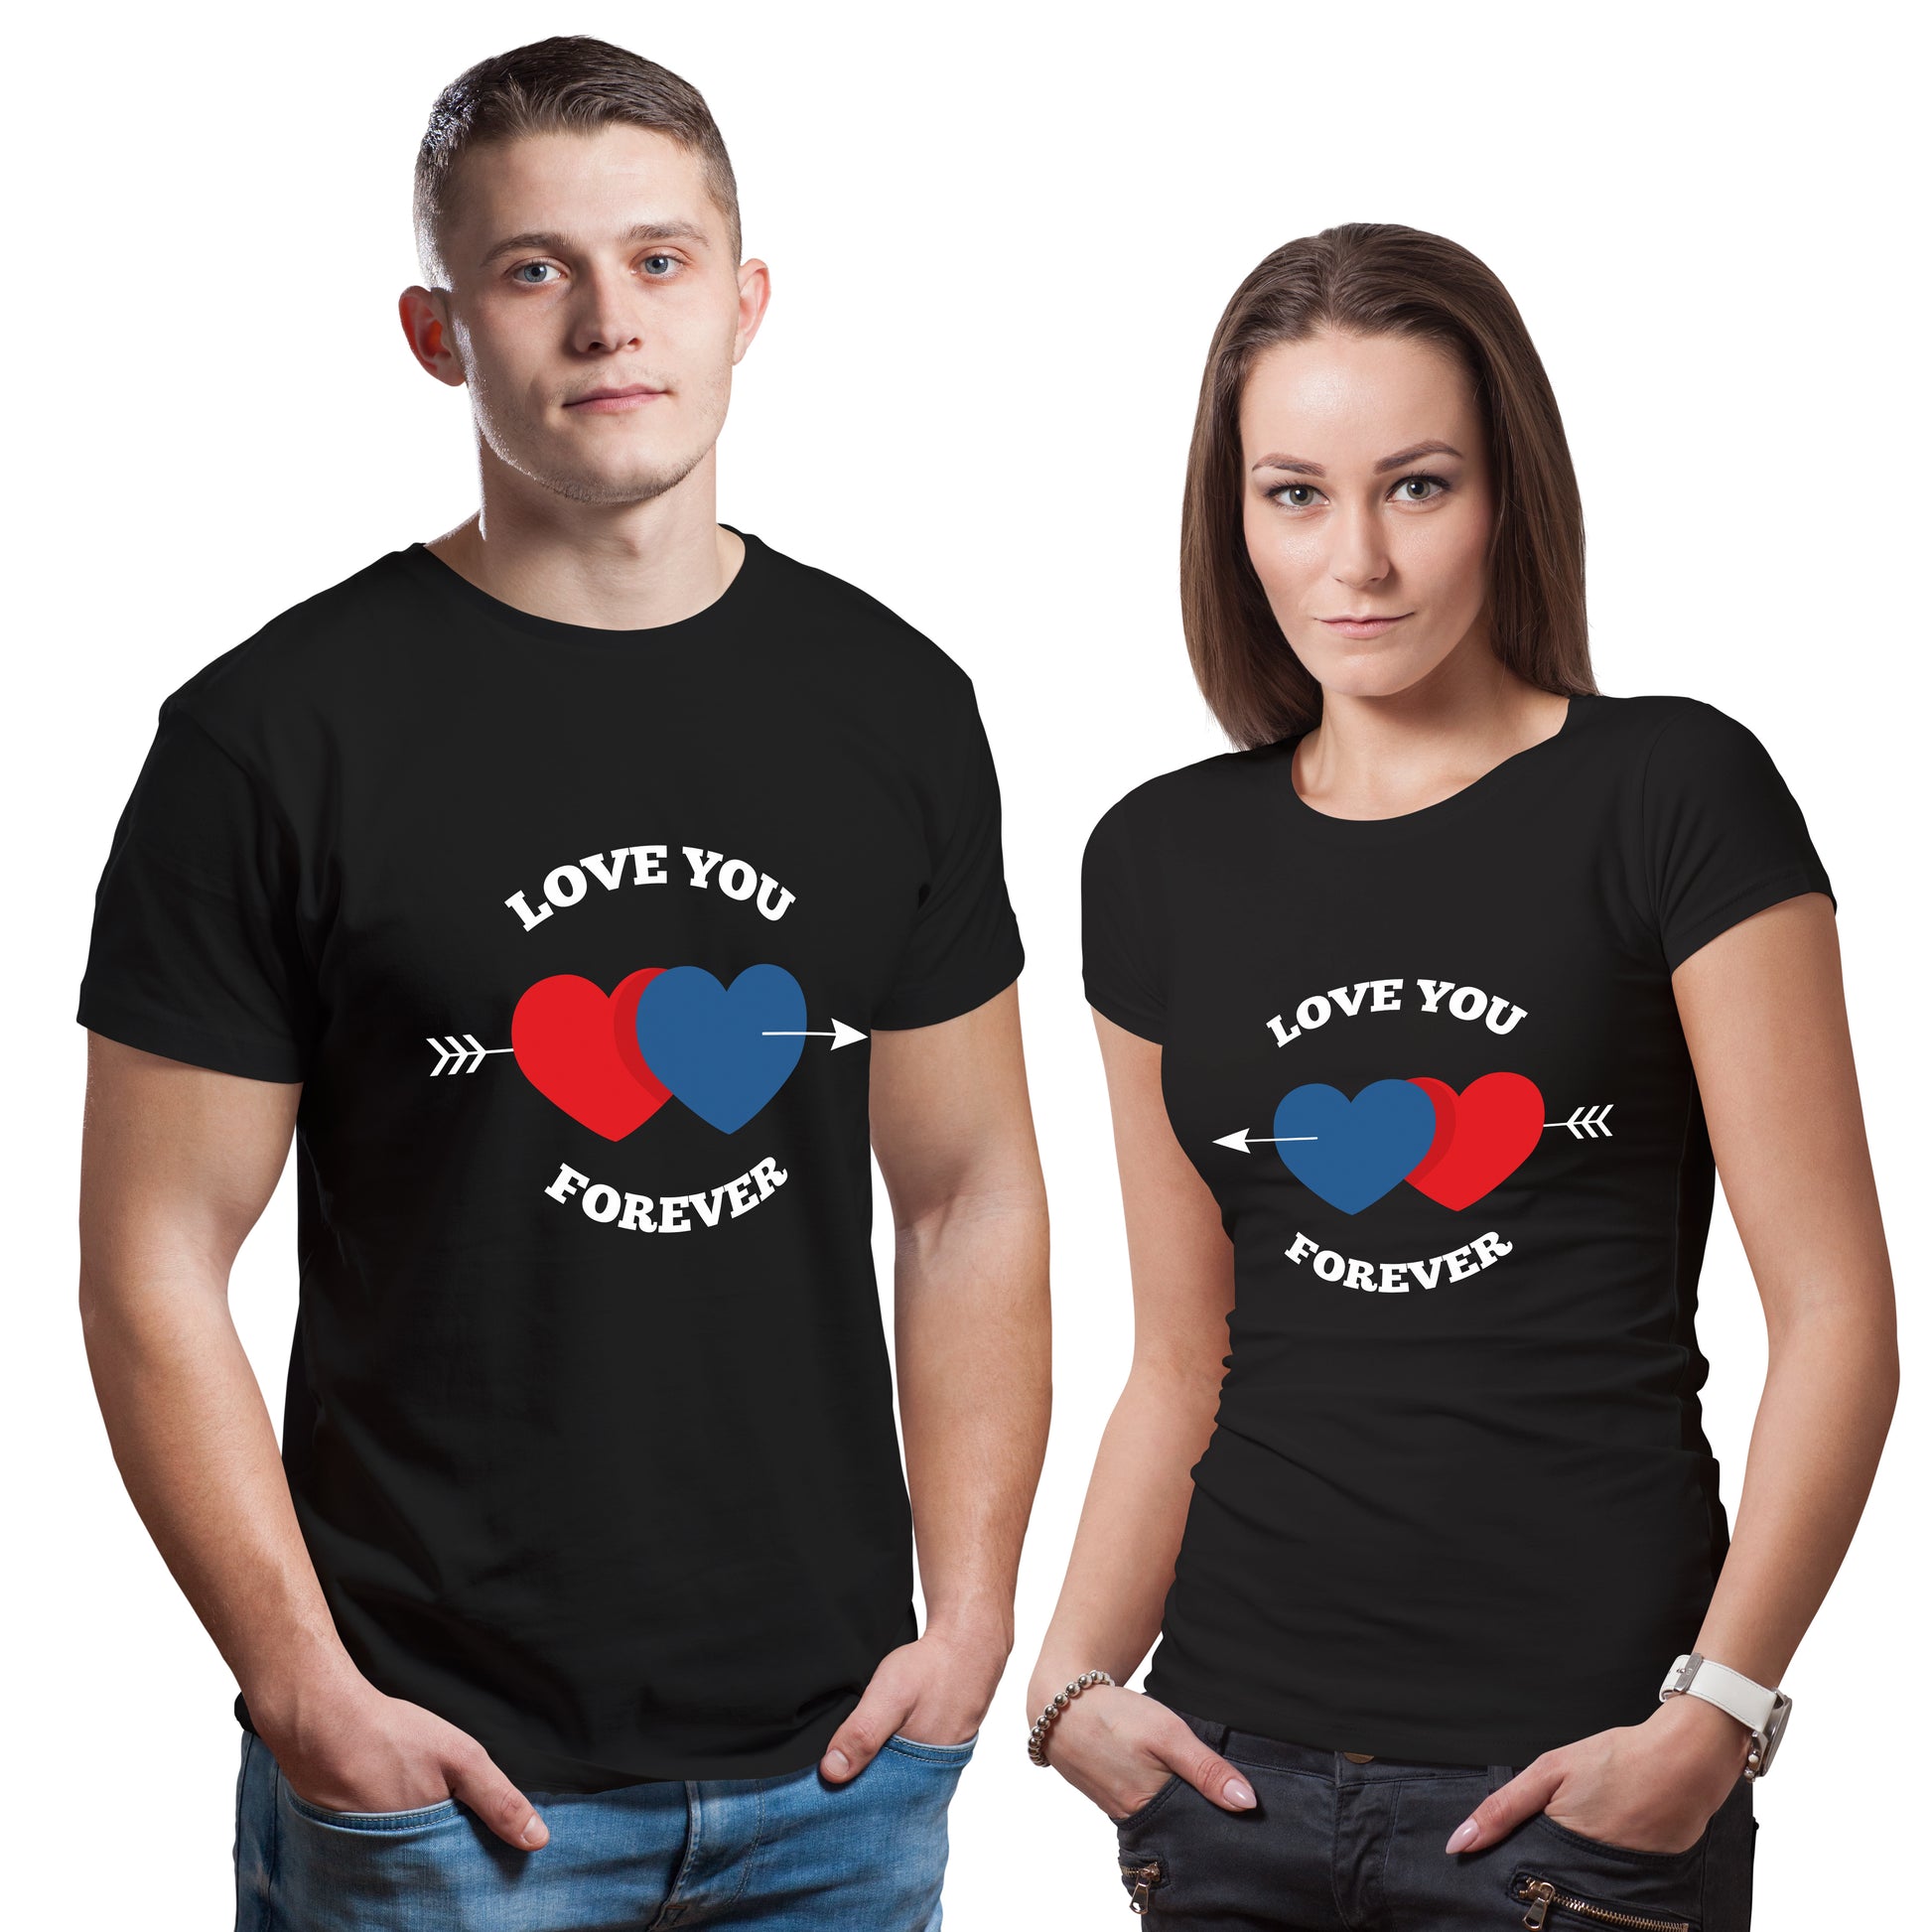 Love you forever matching Couple T shirts- Black